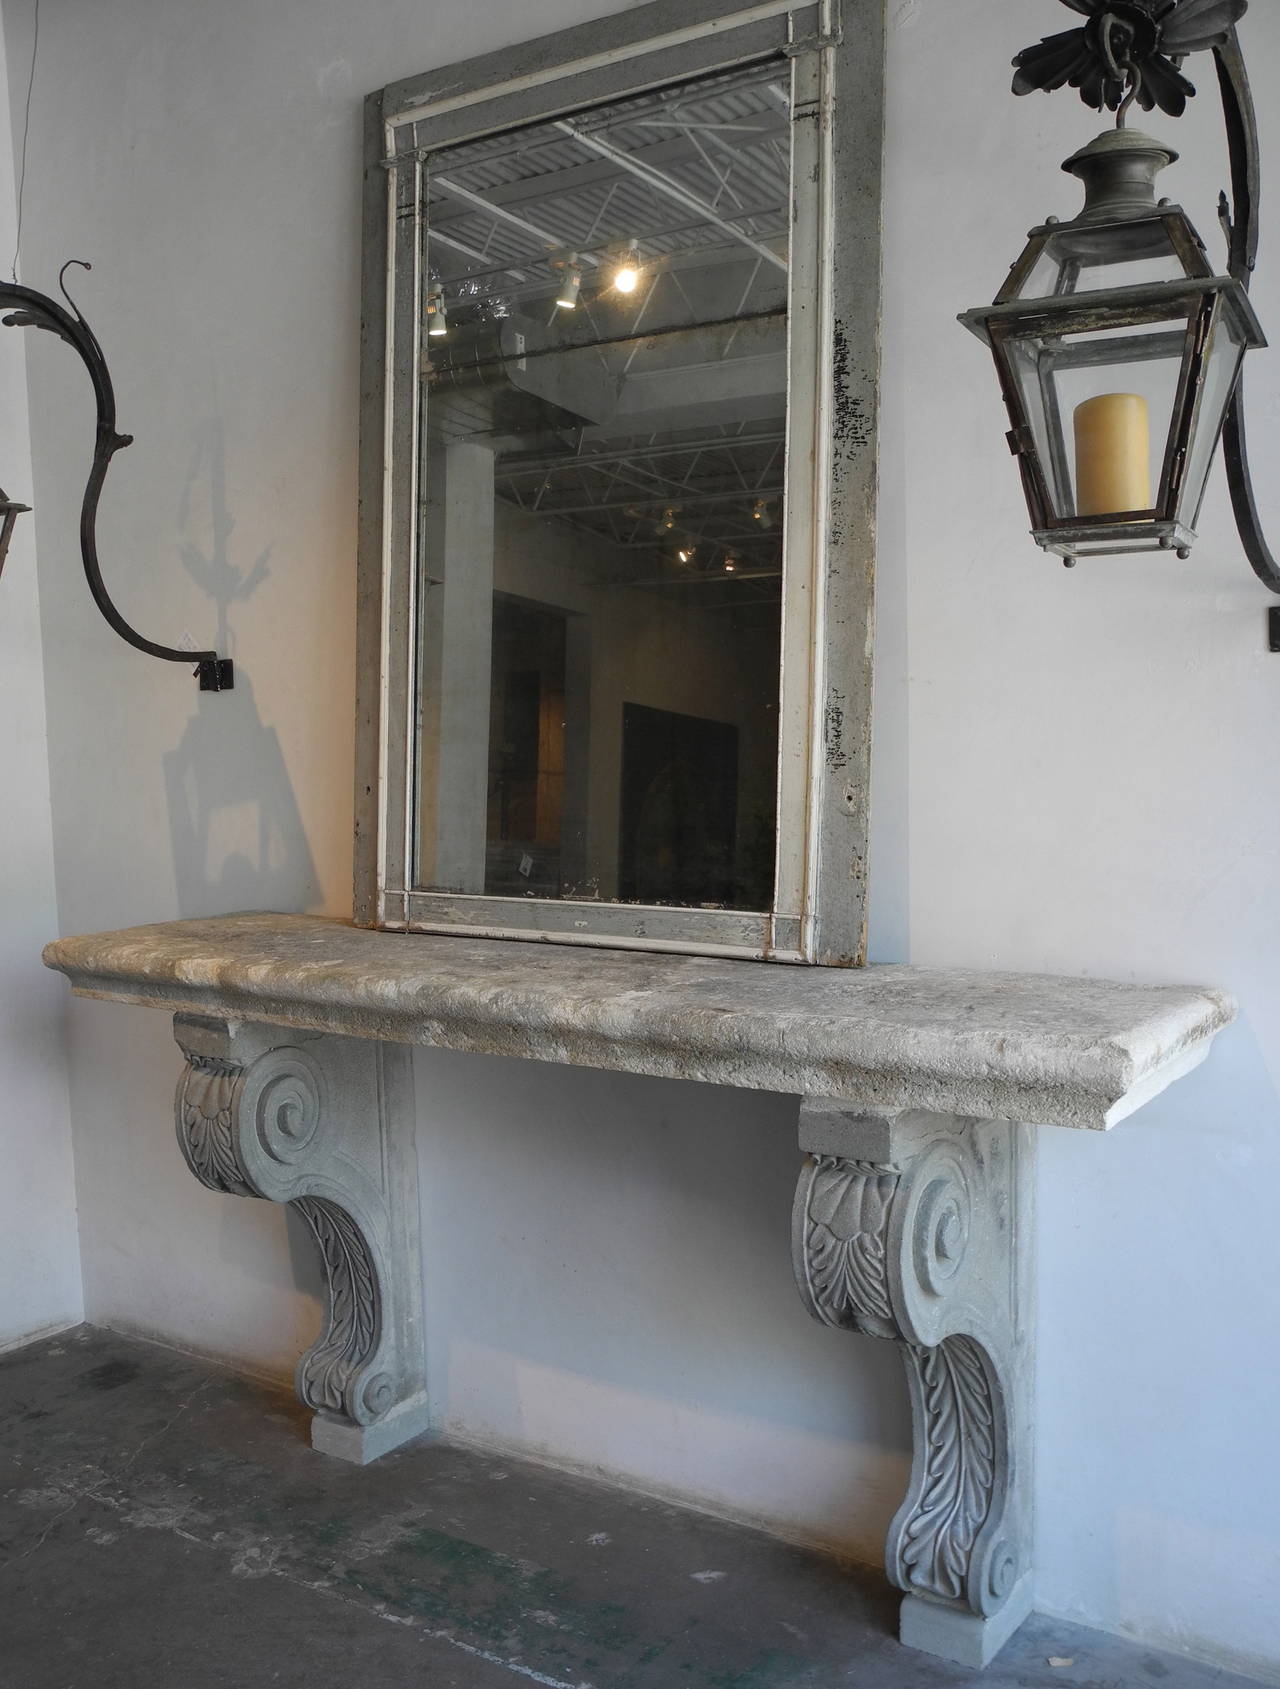 This 18th century console table was reclaimed from the courtyard of a Palazzo in Arezzo, Italy. The grey stone console has unique antique corbel legs. It has detailing in the legs but a simple top and the three pieces combined make for a beautiful